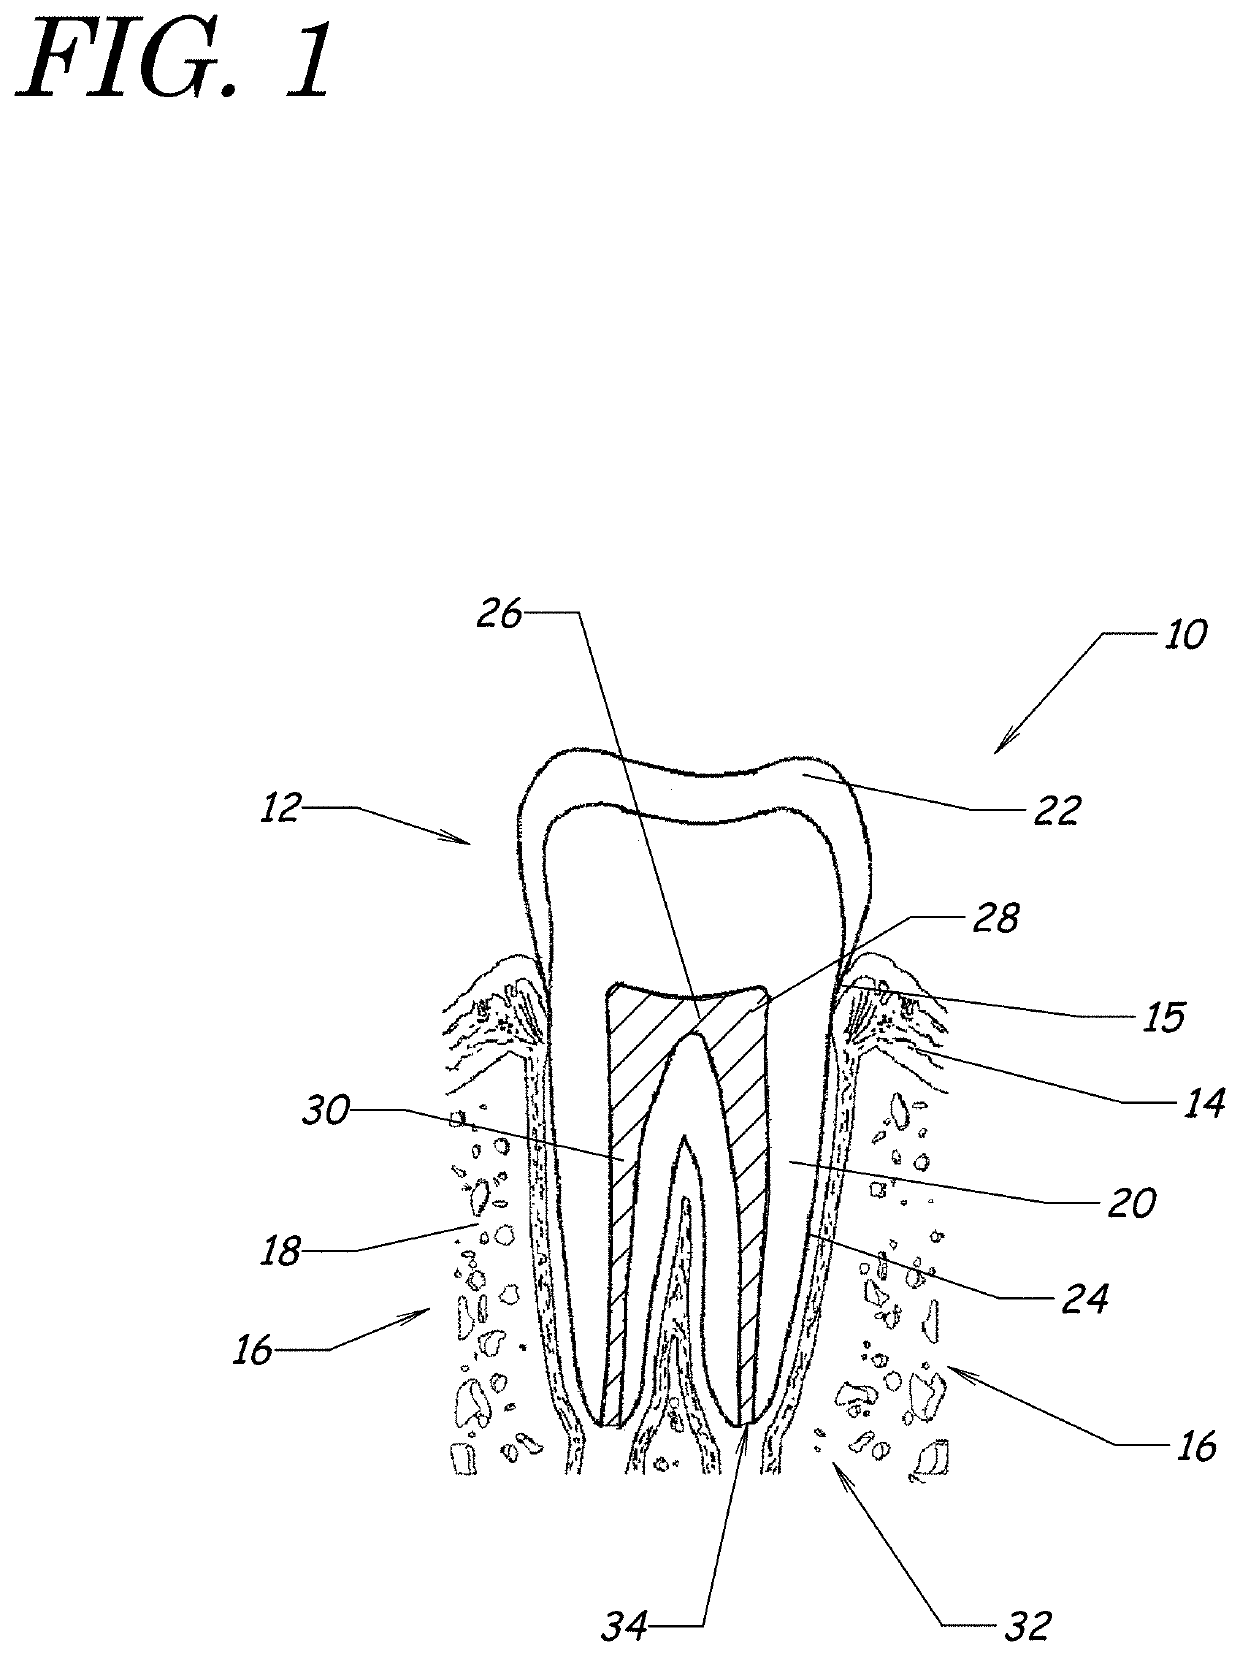 Apparatus, methods, and compositions for endodontic treatments